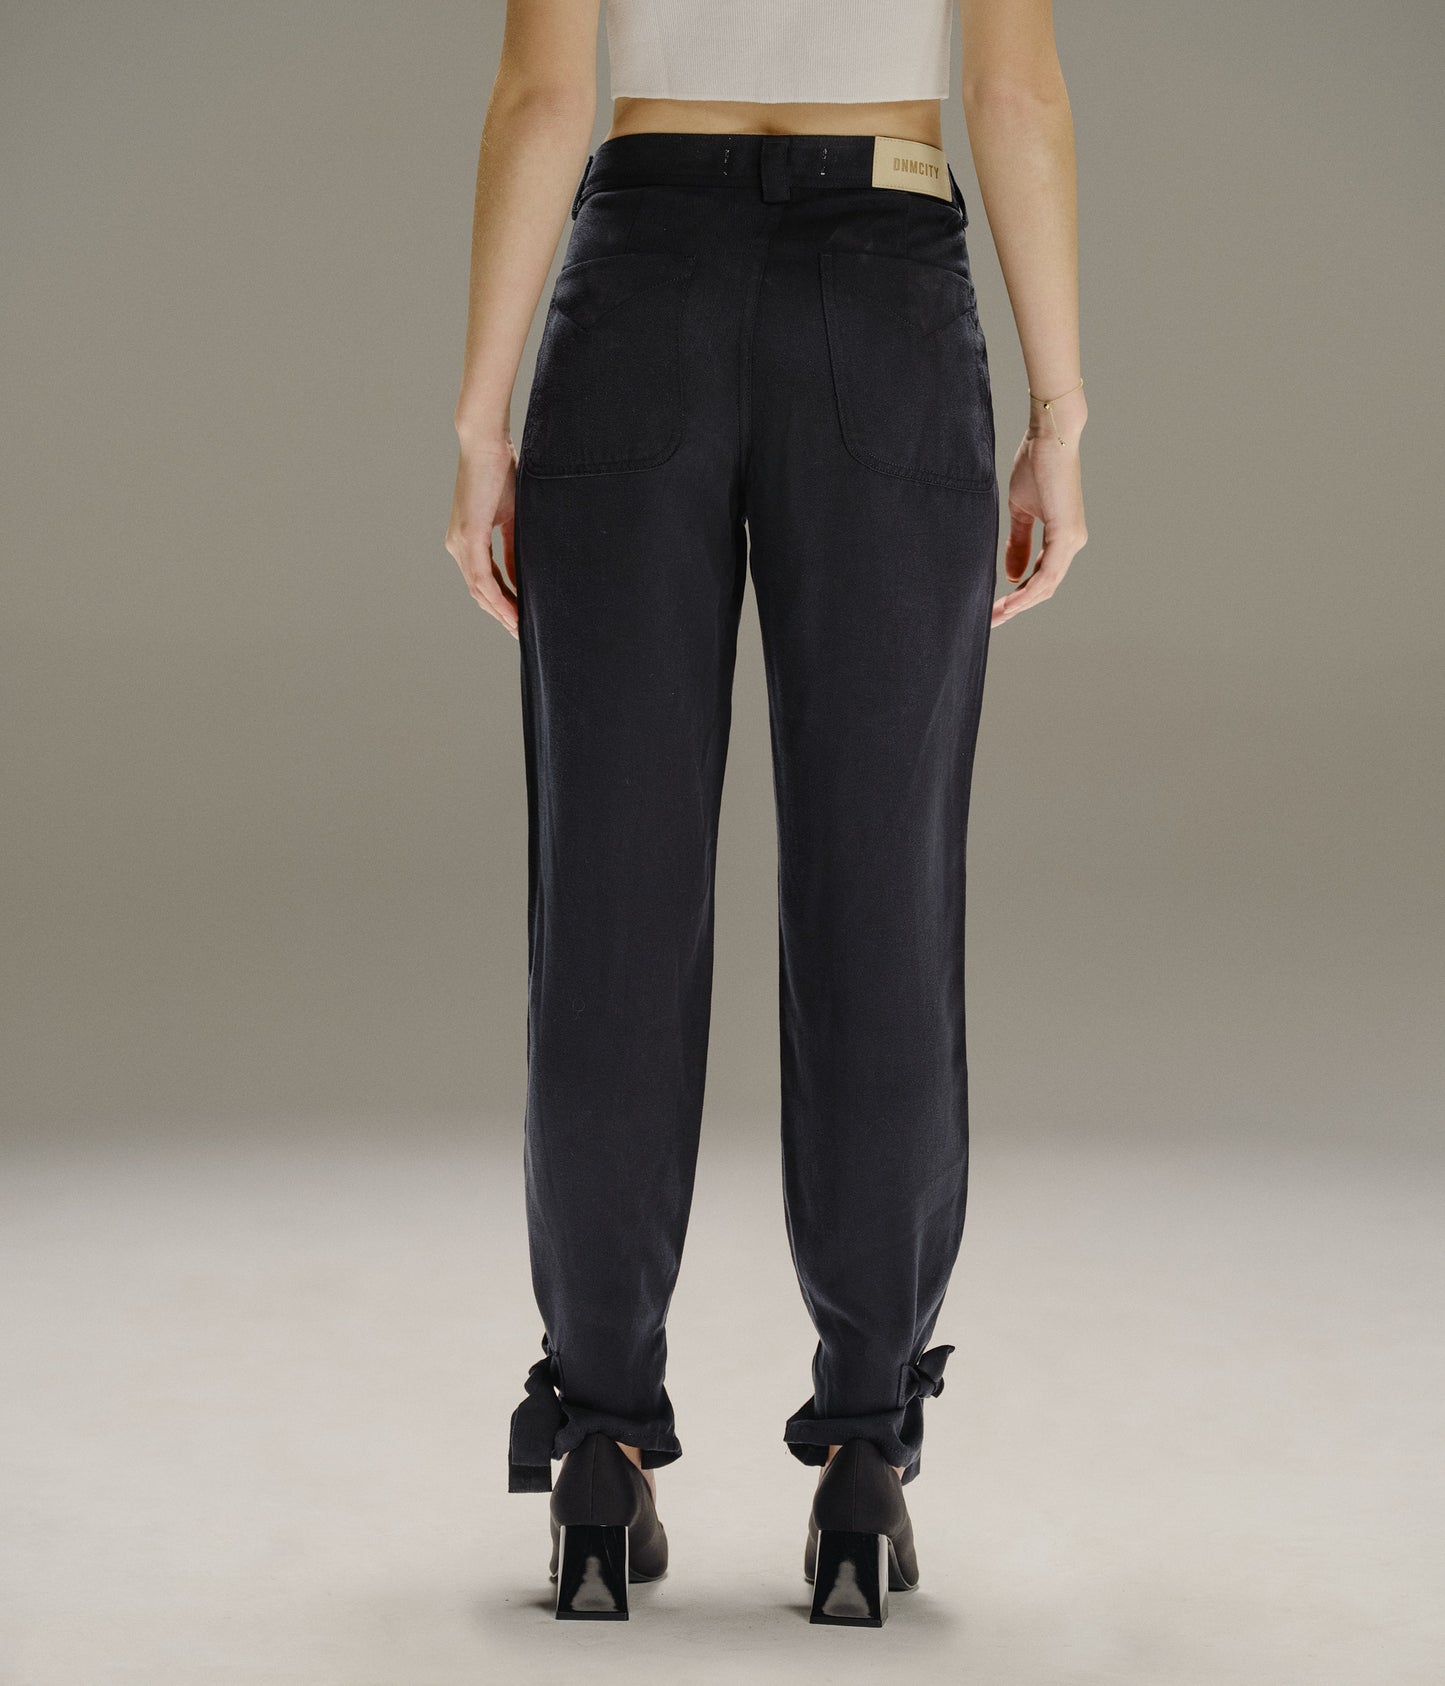 DARCY - CINCHED ANKLE TROUSER - NEWPORT BLUE